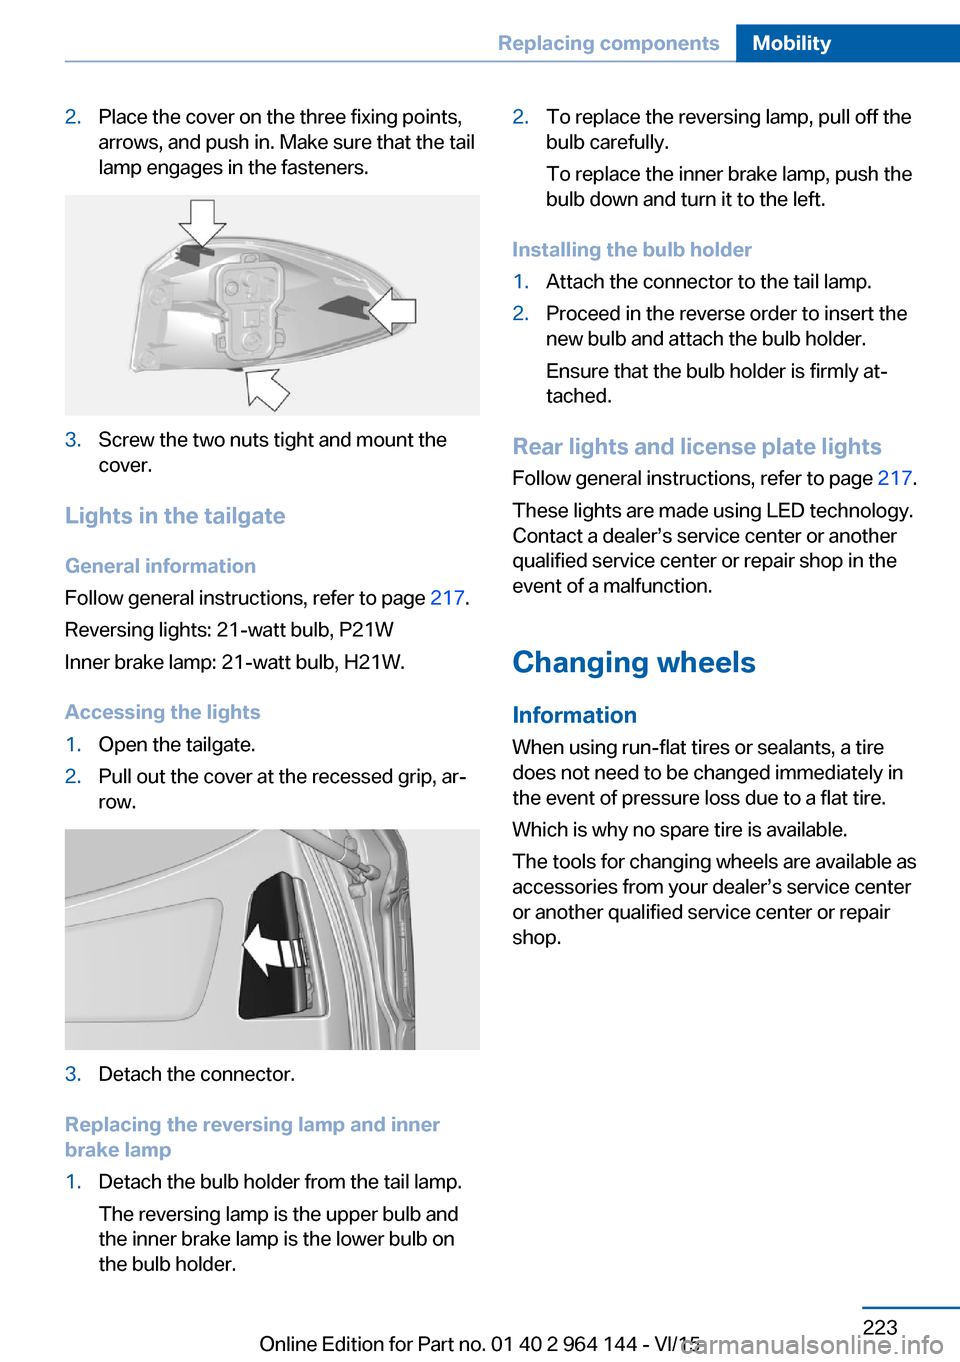 BMW X4 2016 F26 Owners Guide 2.Place the cover on the three fixing points,
arrows, and push in. Make sure that the tail
lamp engages in the fasteners.3.Screw the two nuts tight and mount the
cover.
Lights in the tailgate
General 